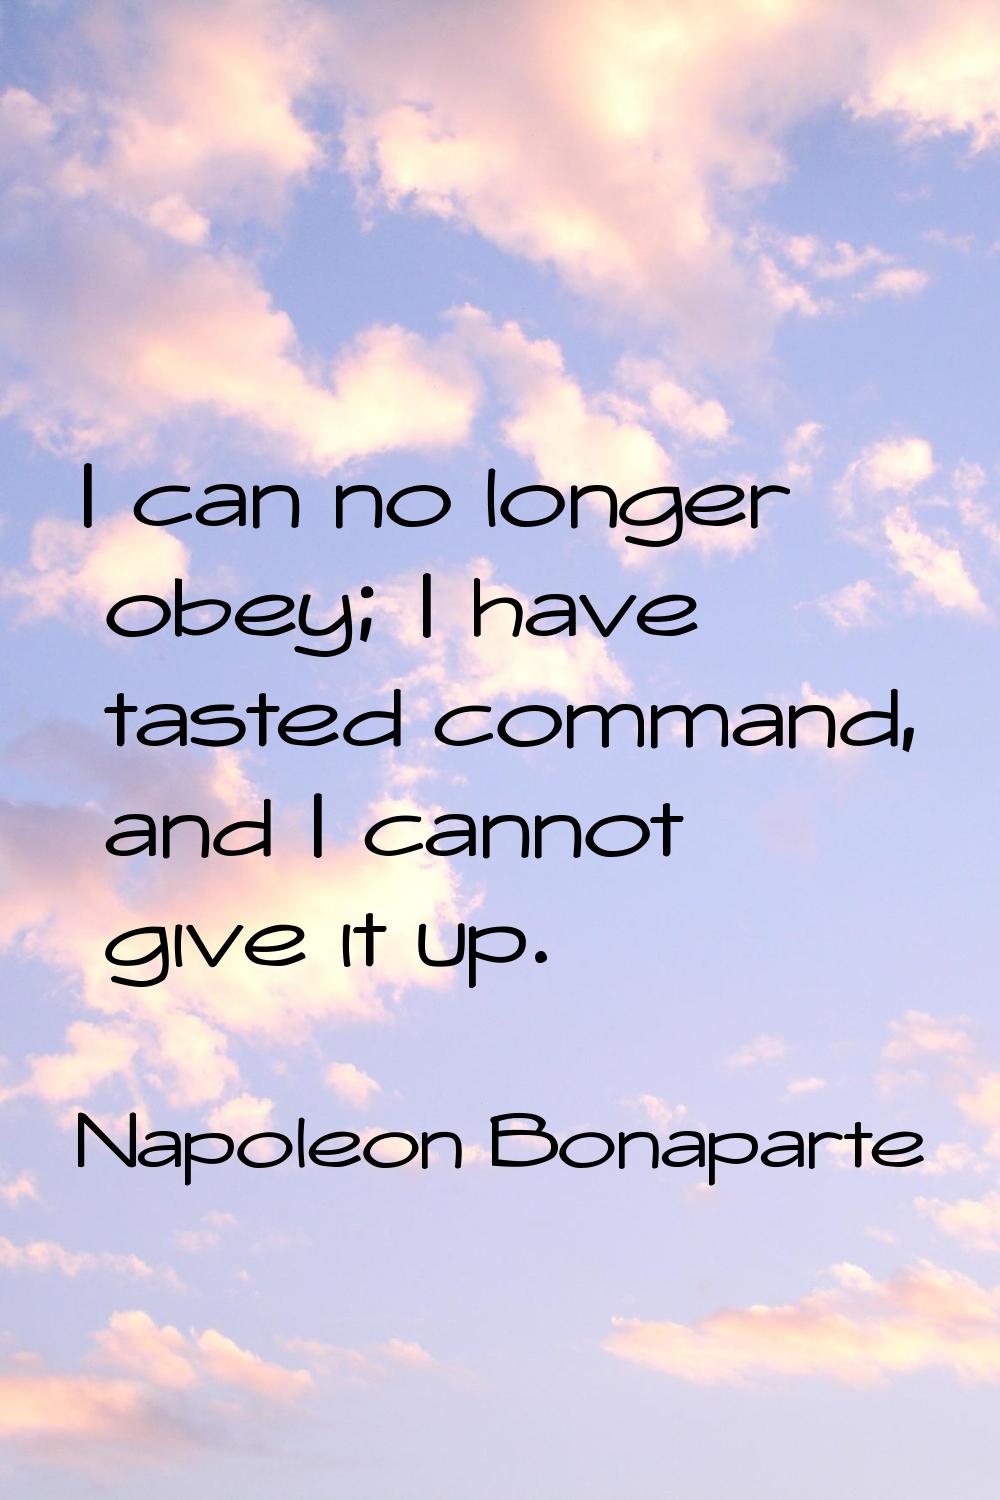 I can no longer obey; I have tasted command, and I cannot give it up.